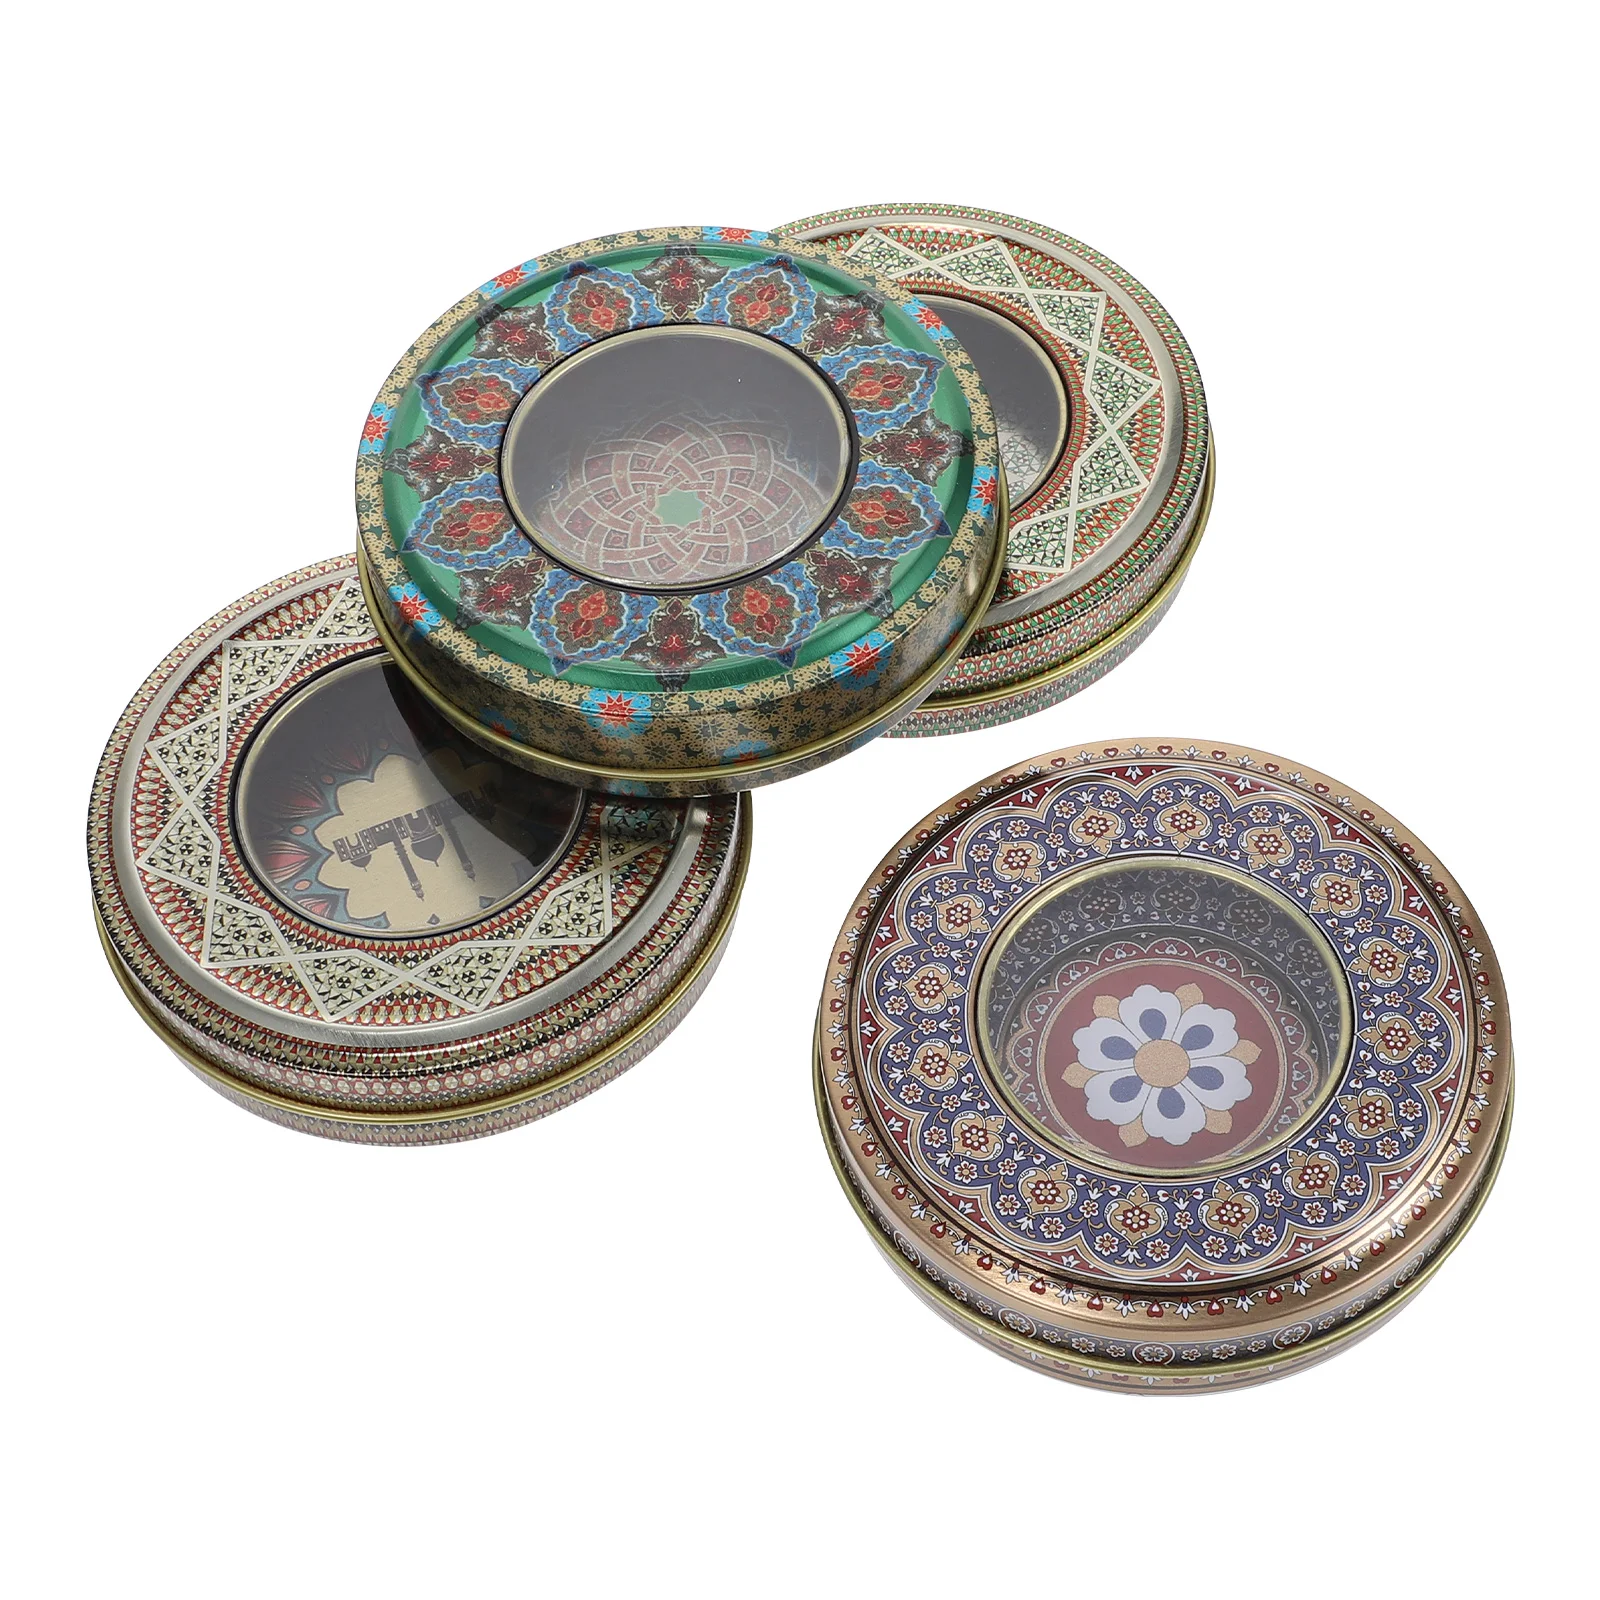 

4 Pcs Food Bakery Boxes Containers Lids Metal Jars Tin Cans Lids Saffron Tin Box Storage Jar Candy Canister Saffron Wrapping Box